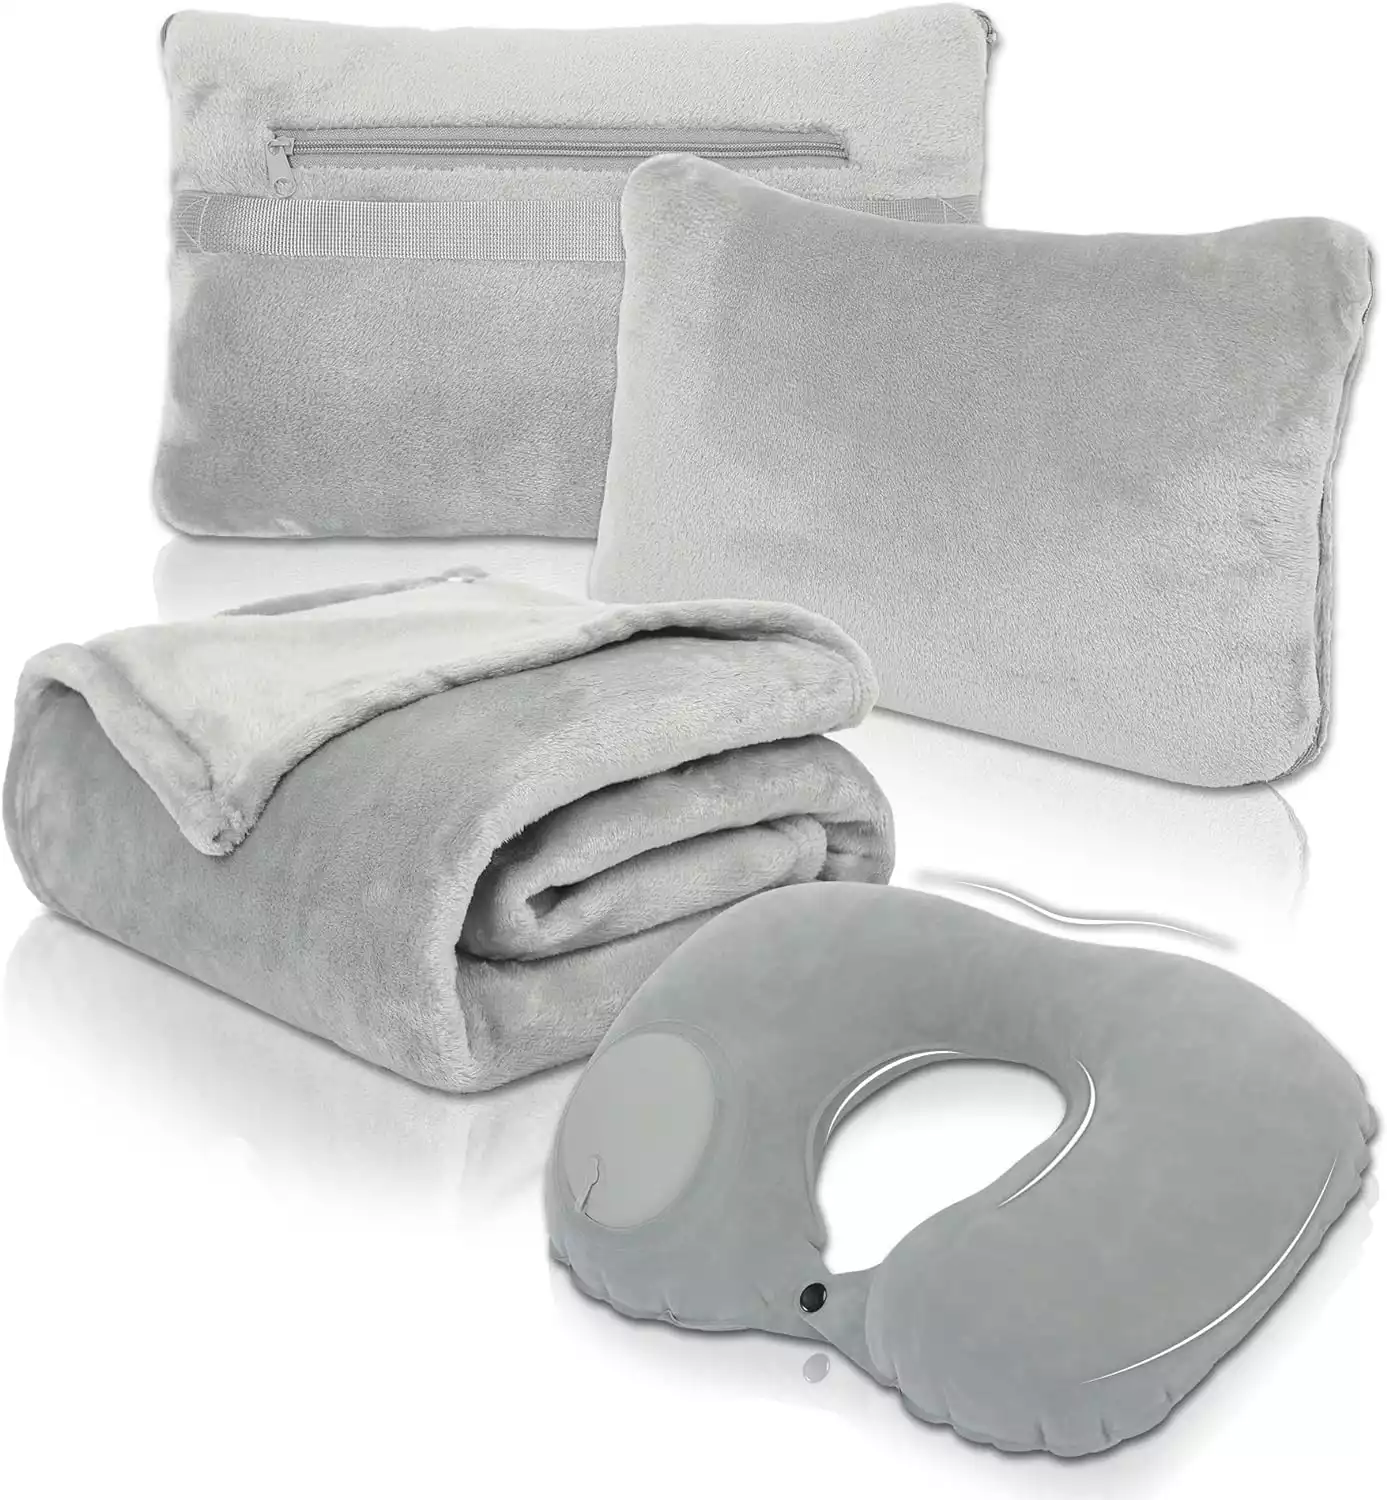 Votown Home Travel Blanket and Pillow Set